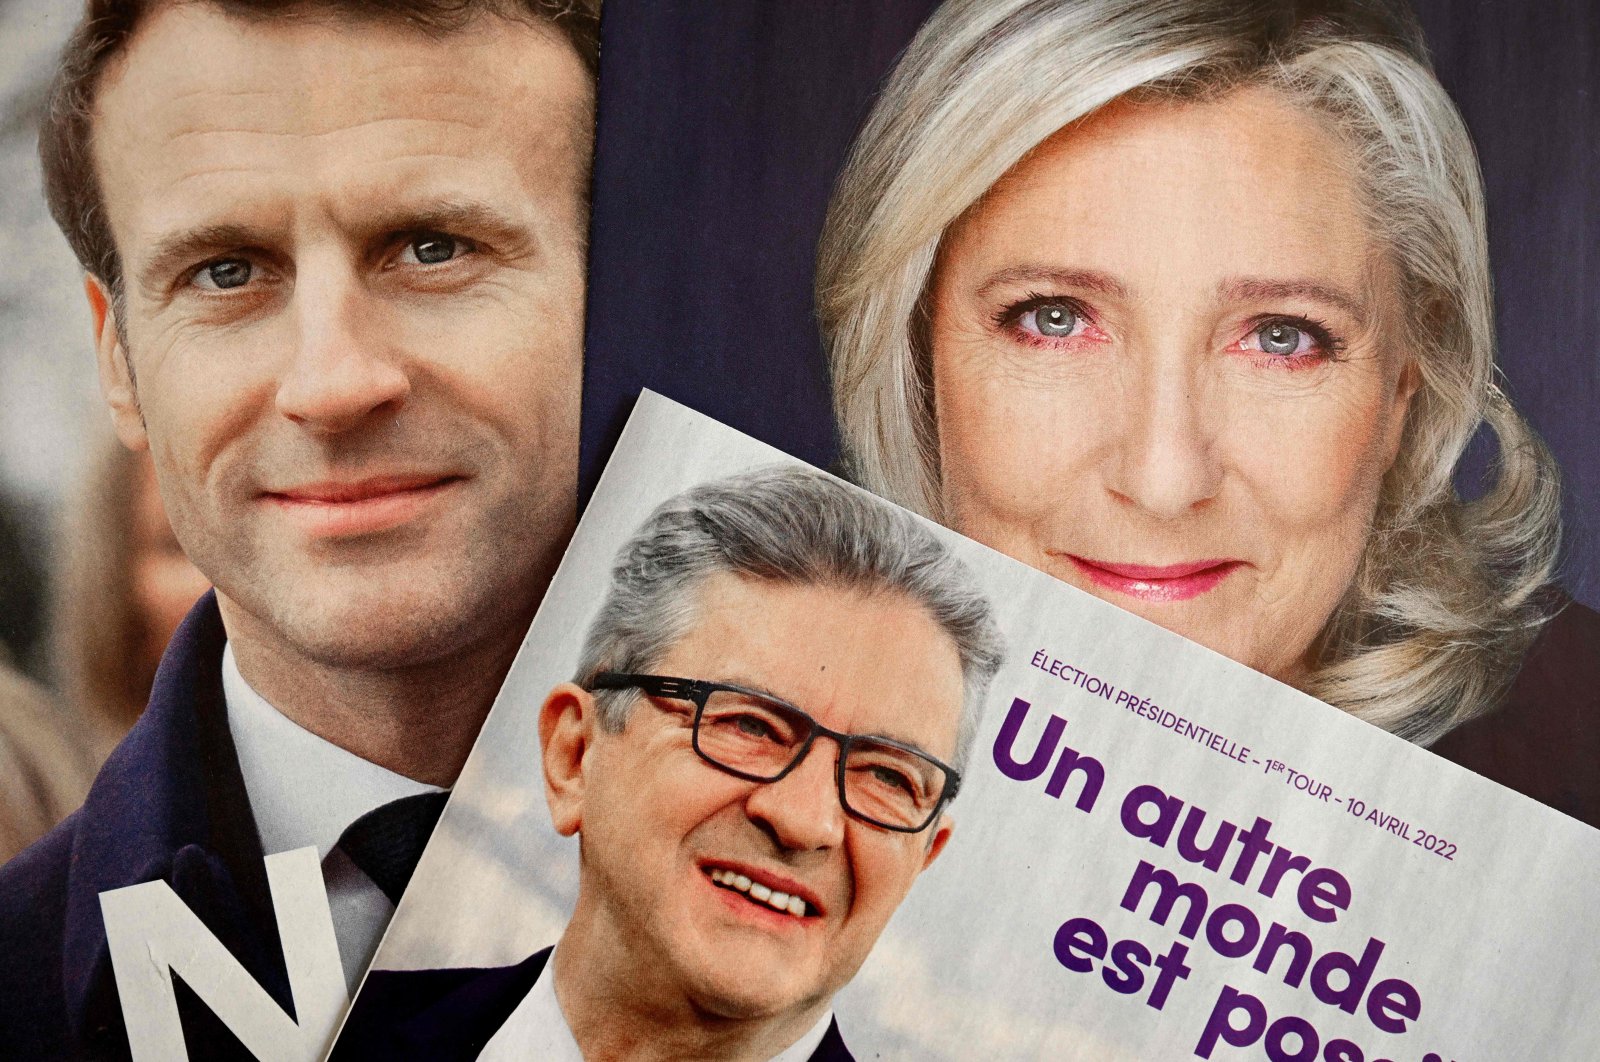 The folded electoral leaflets of French President Emmanuel Macron&#039;s La Republique en Marche party (L), La France Insoumise party&#039;s presidential candidate Jean-Luc Melenchon (C) and far-right Rassemblement National candidate Marine Le Pen ahead of the first round of the French presidential election, Marseille, southern France, April 6, 2022.